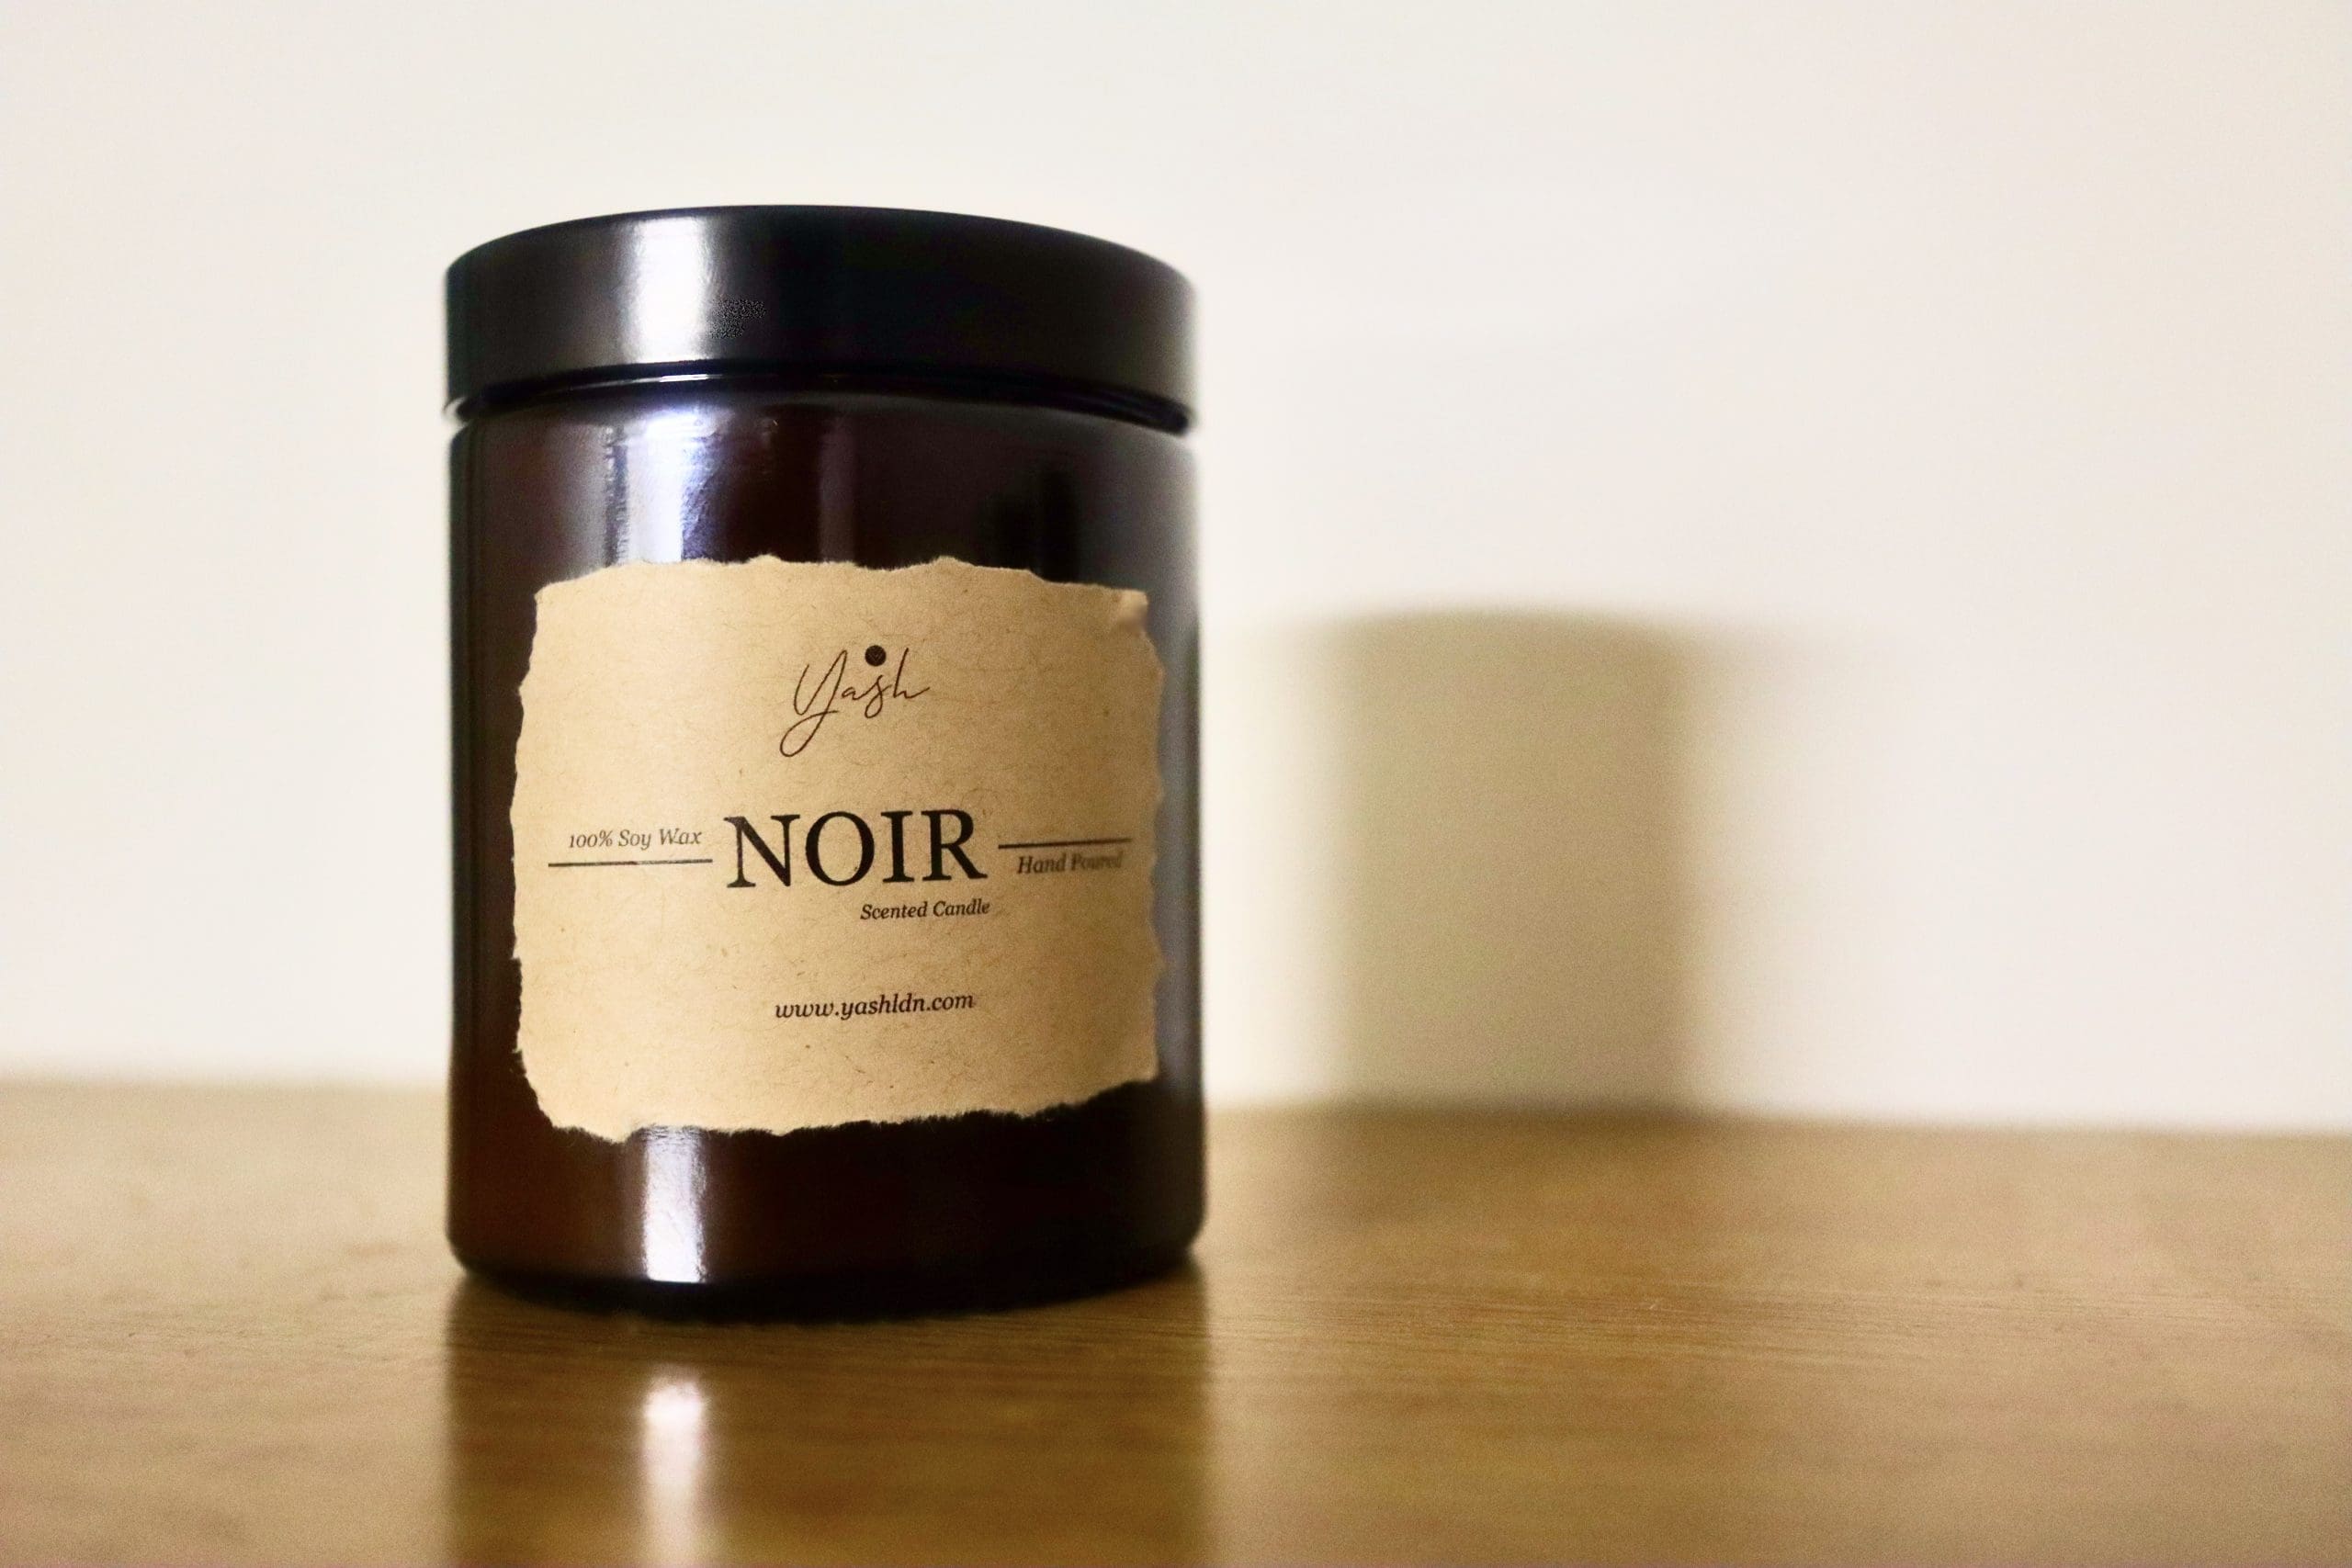 Noir: Amber Noir Scented Soy Candle - Wood Wick